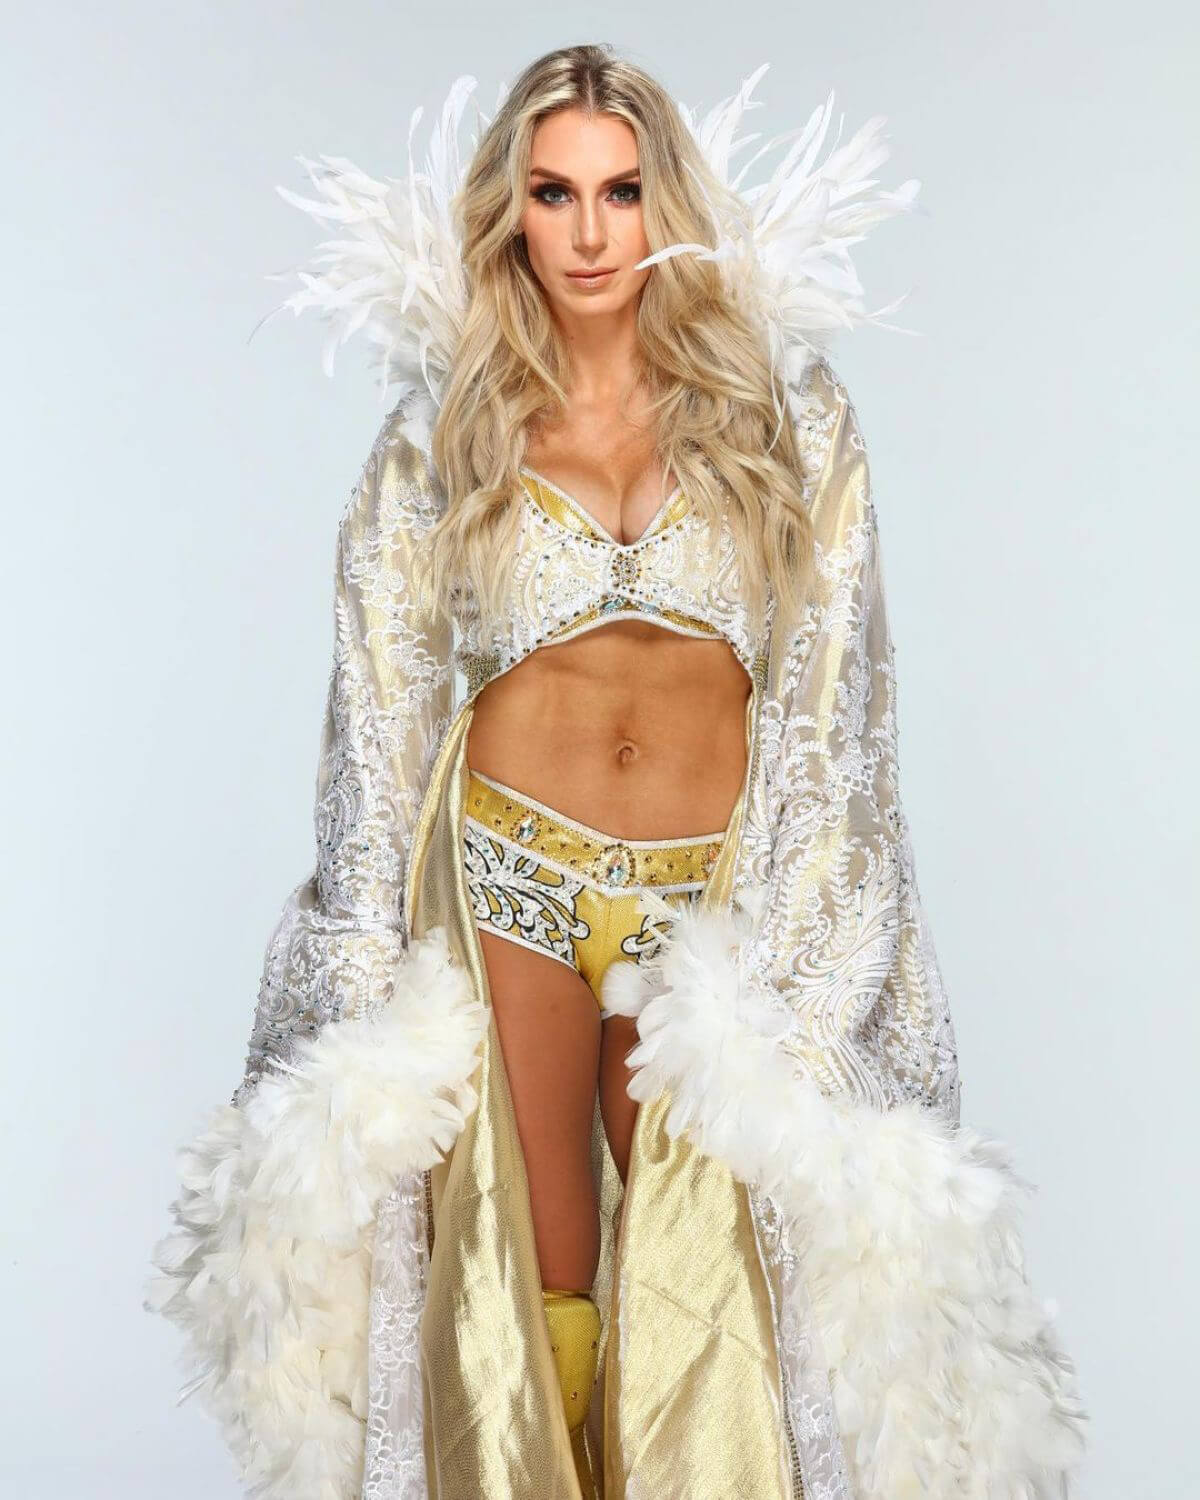 Charlotte Flair Shared Photos On Instagram 03/23/2021 1